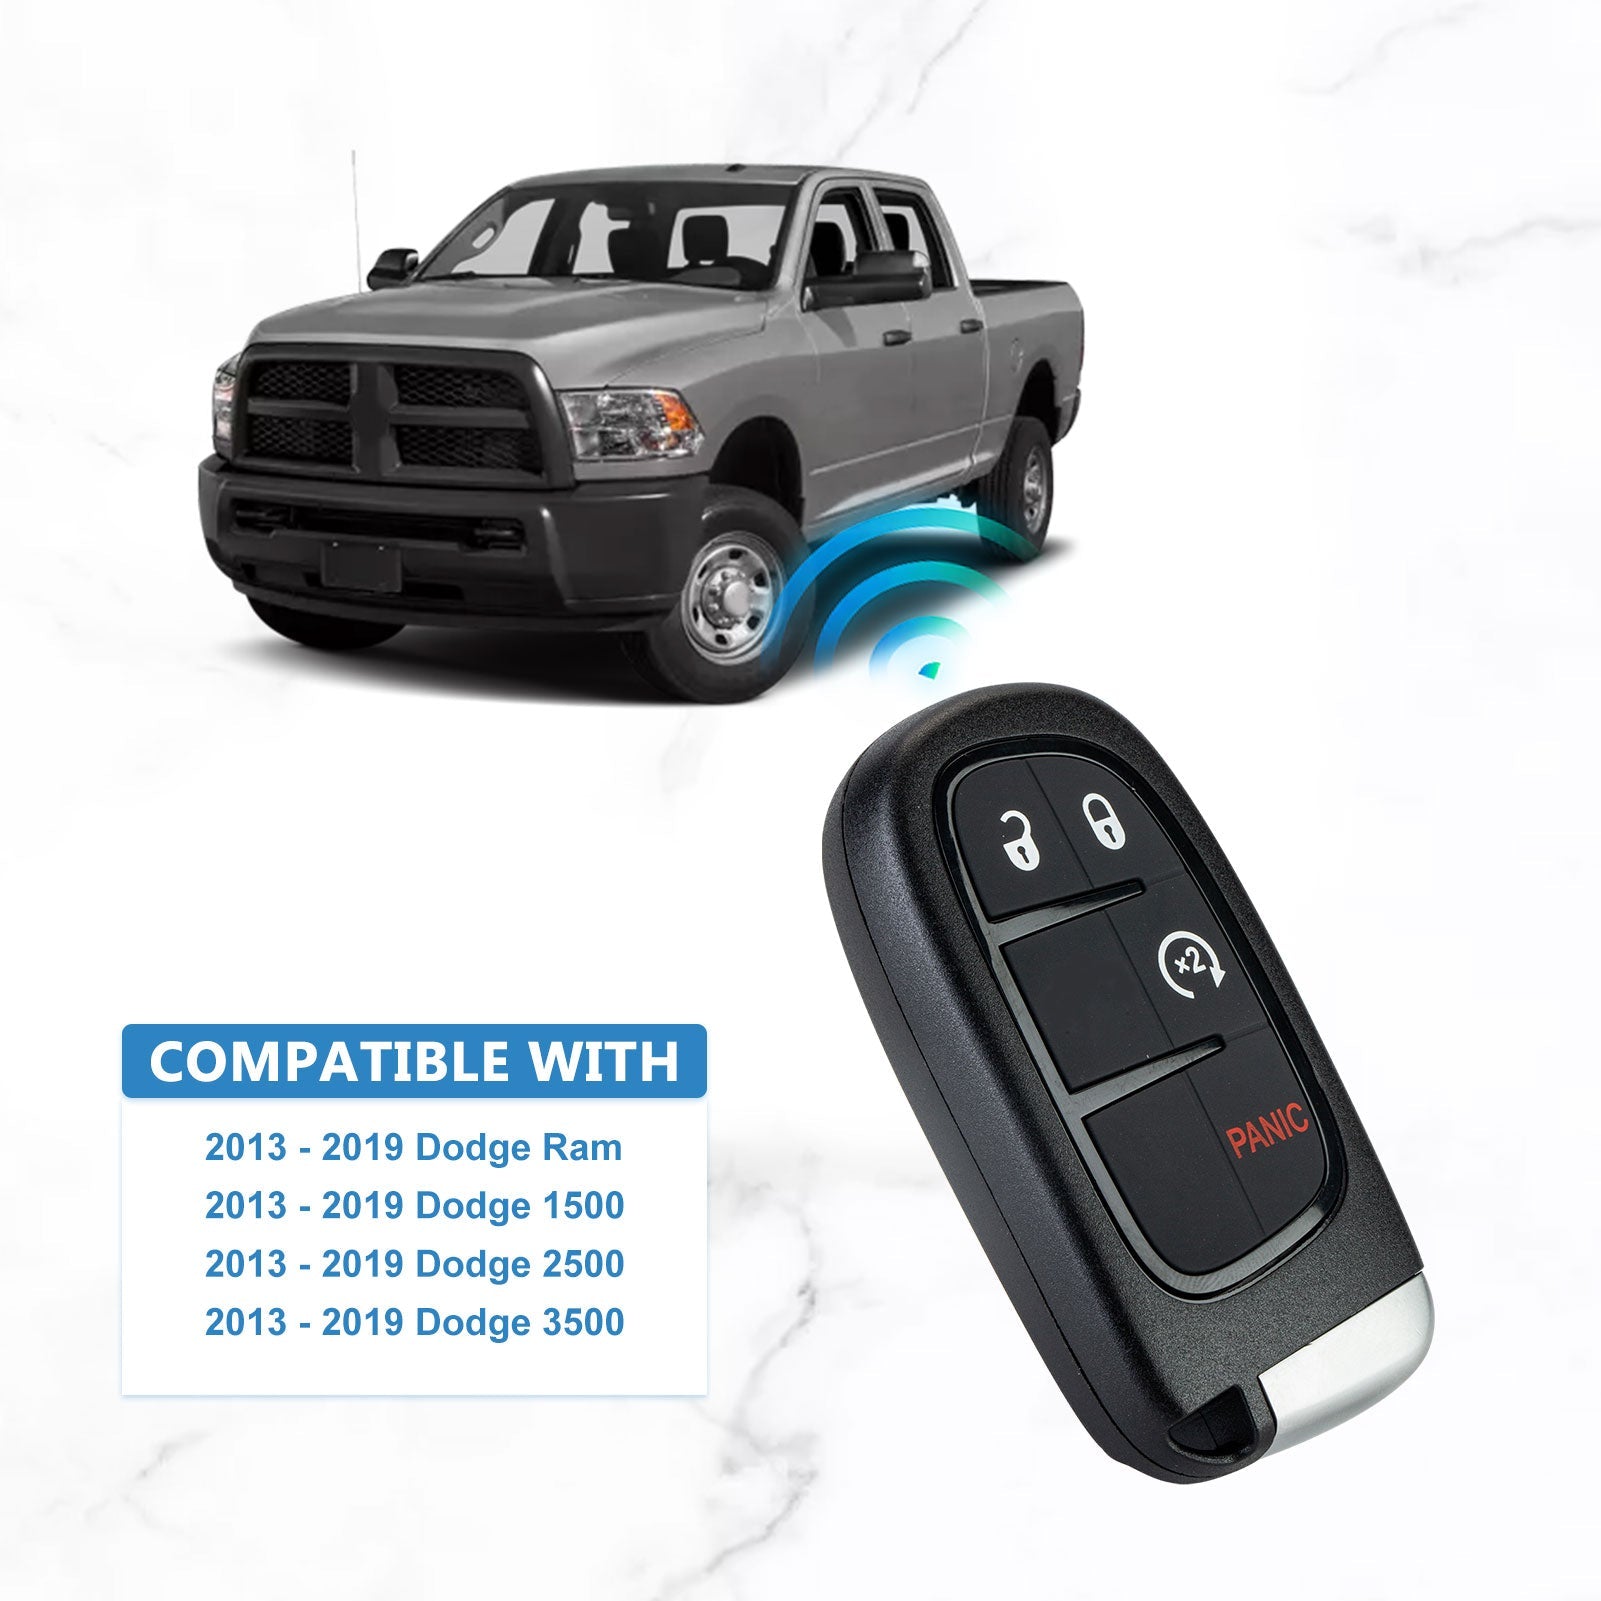 Car Key Fob 46 CHIP Keyless Entry Remote Control Replacement for 2013-2019 Ram 1500 2500 3500 433Mhz GQ4-54T  KR-D4RG-05